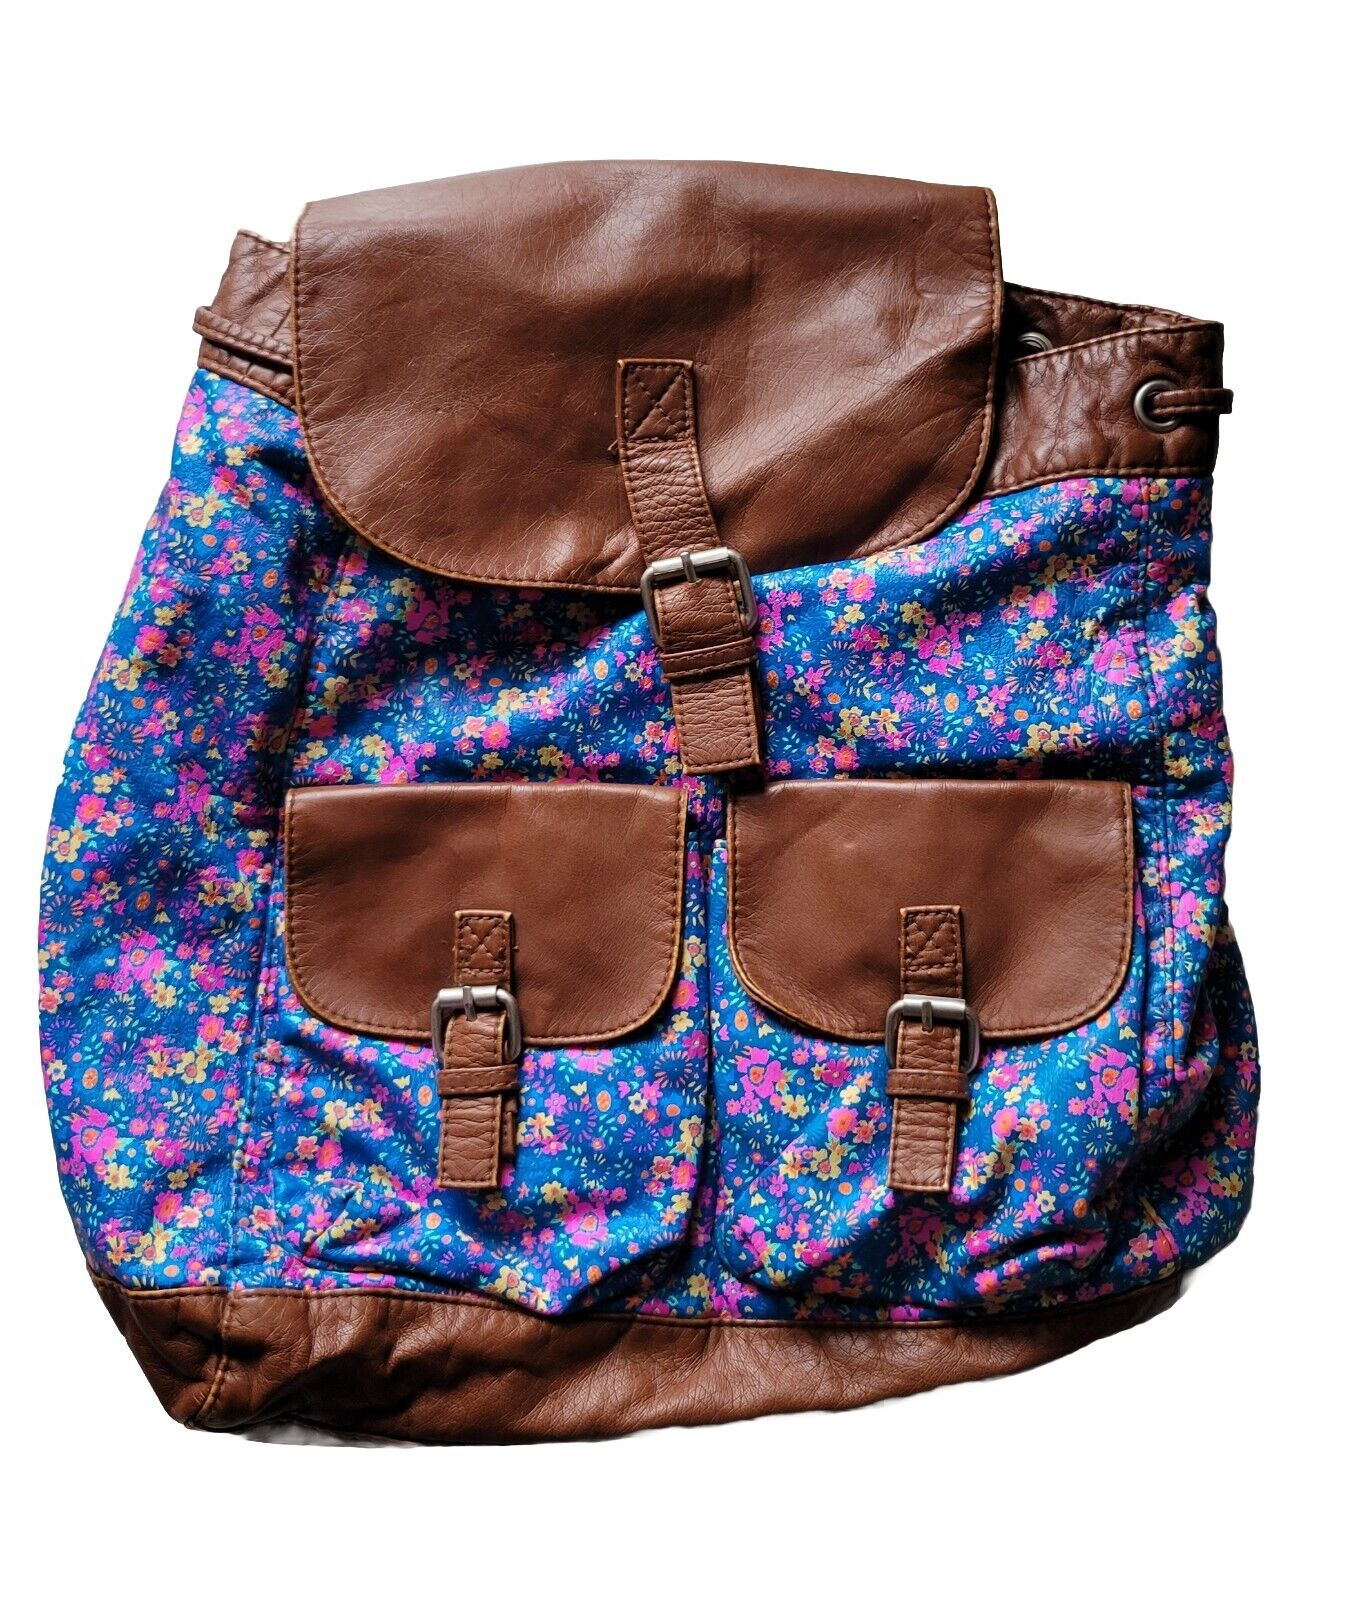 New Bongo Multicolor Floral PU Leather Trim Blue Brown Backpack Purse Bag NWT